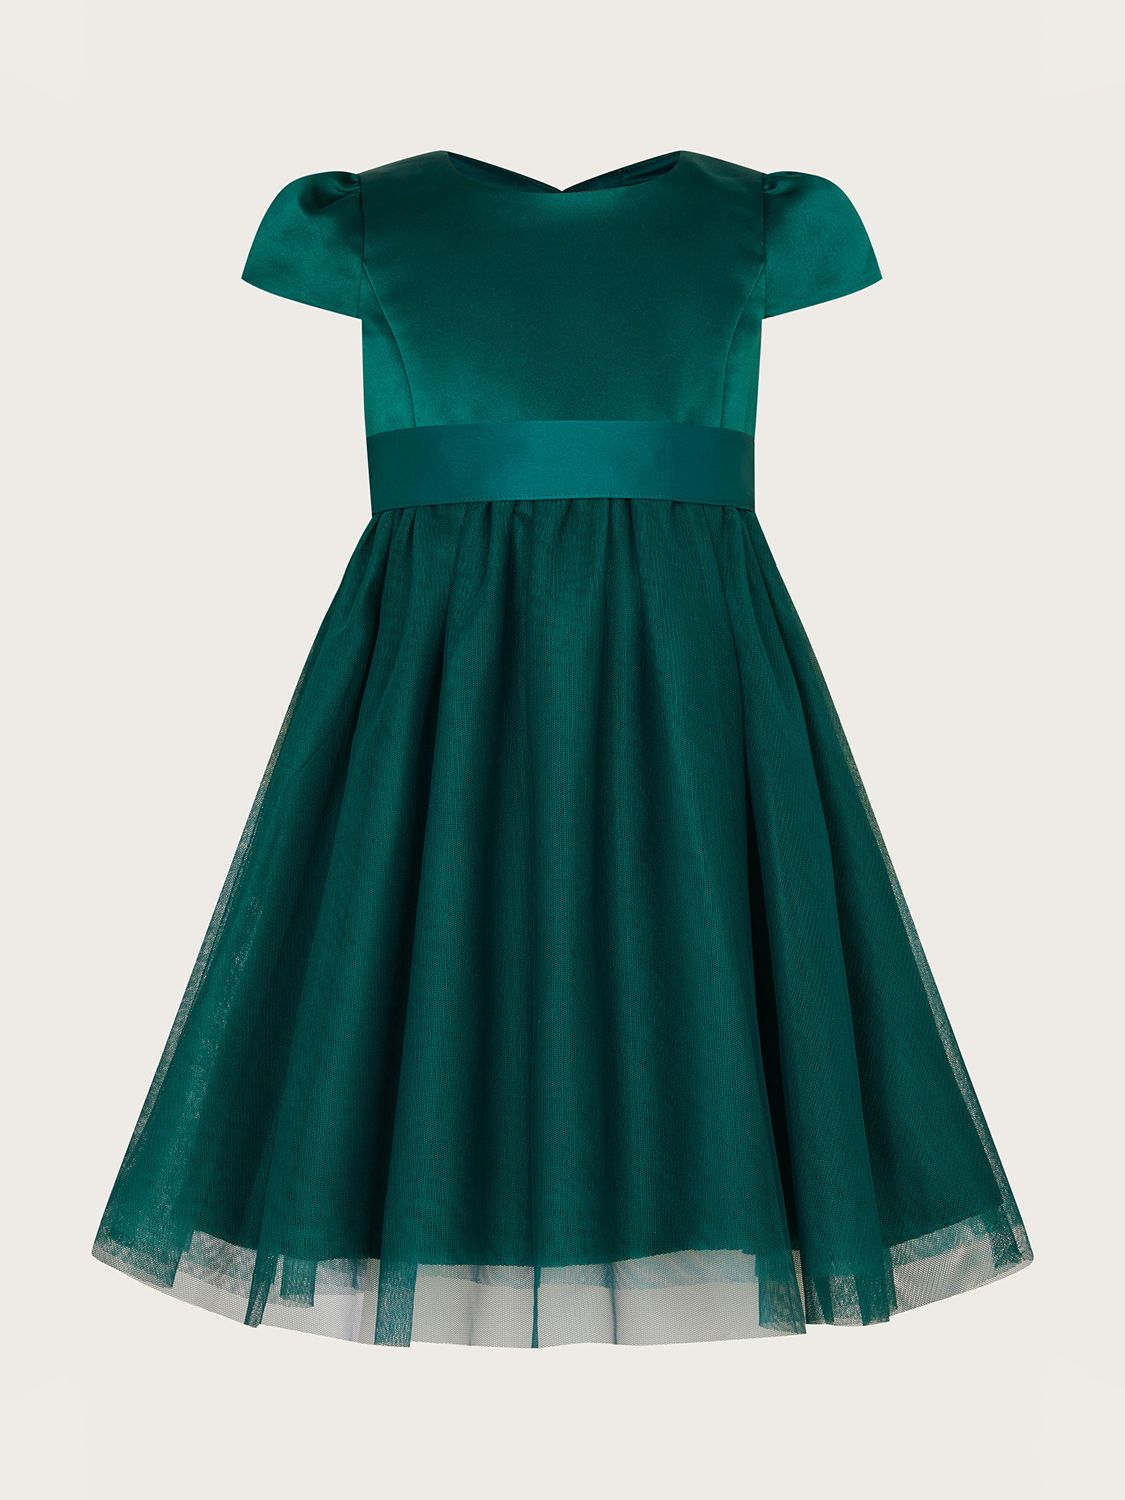 Monsoon Baby Sew Tulle Bridesmaids Dress, Emerald, 0-3 months